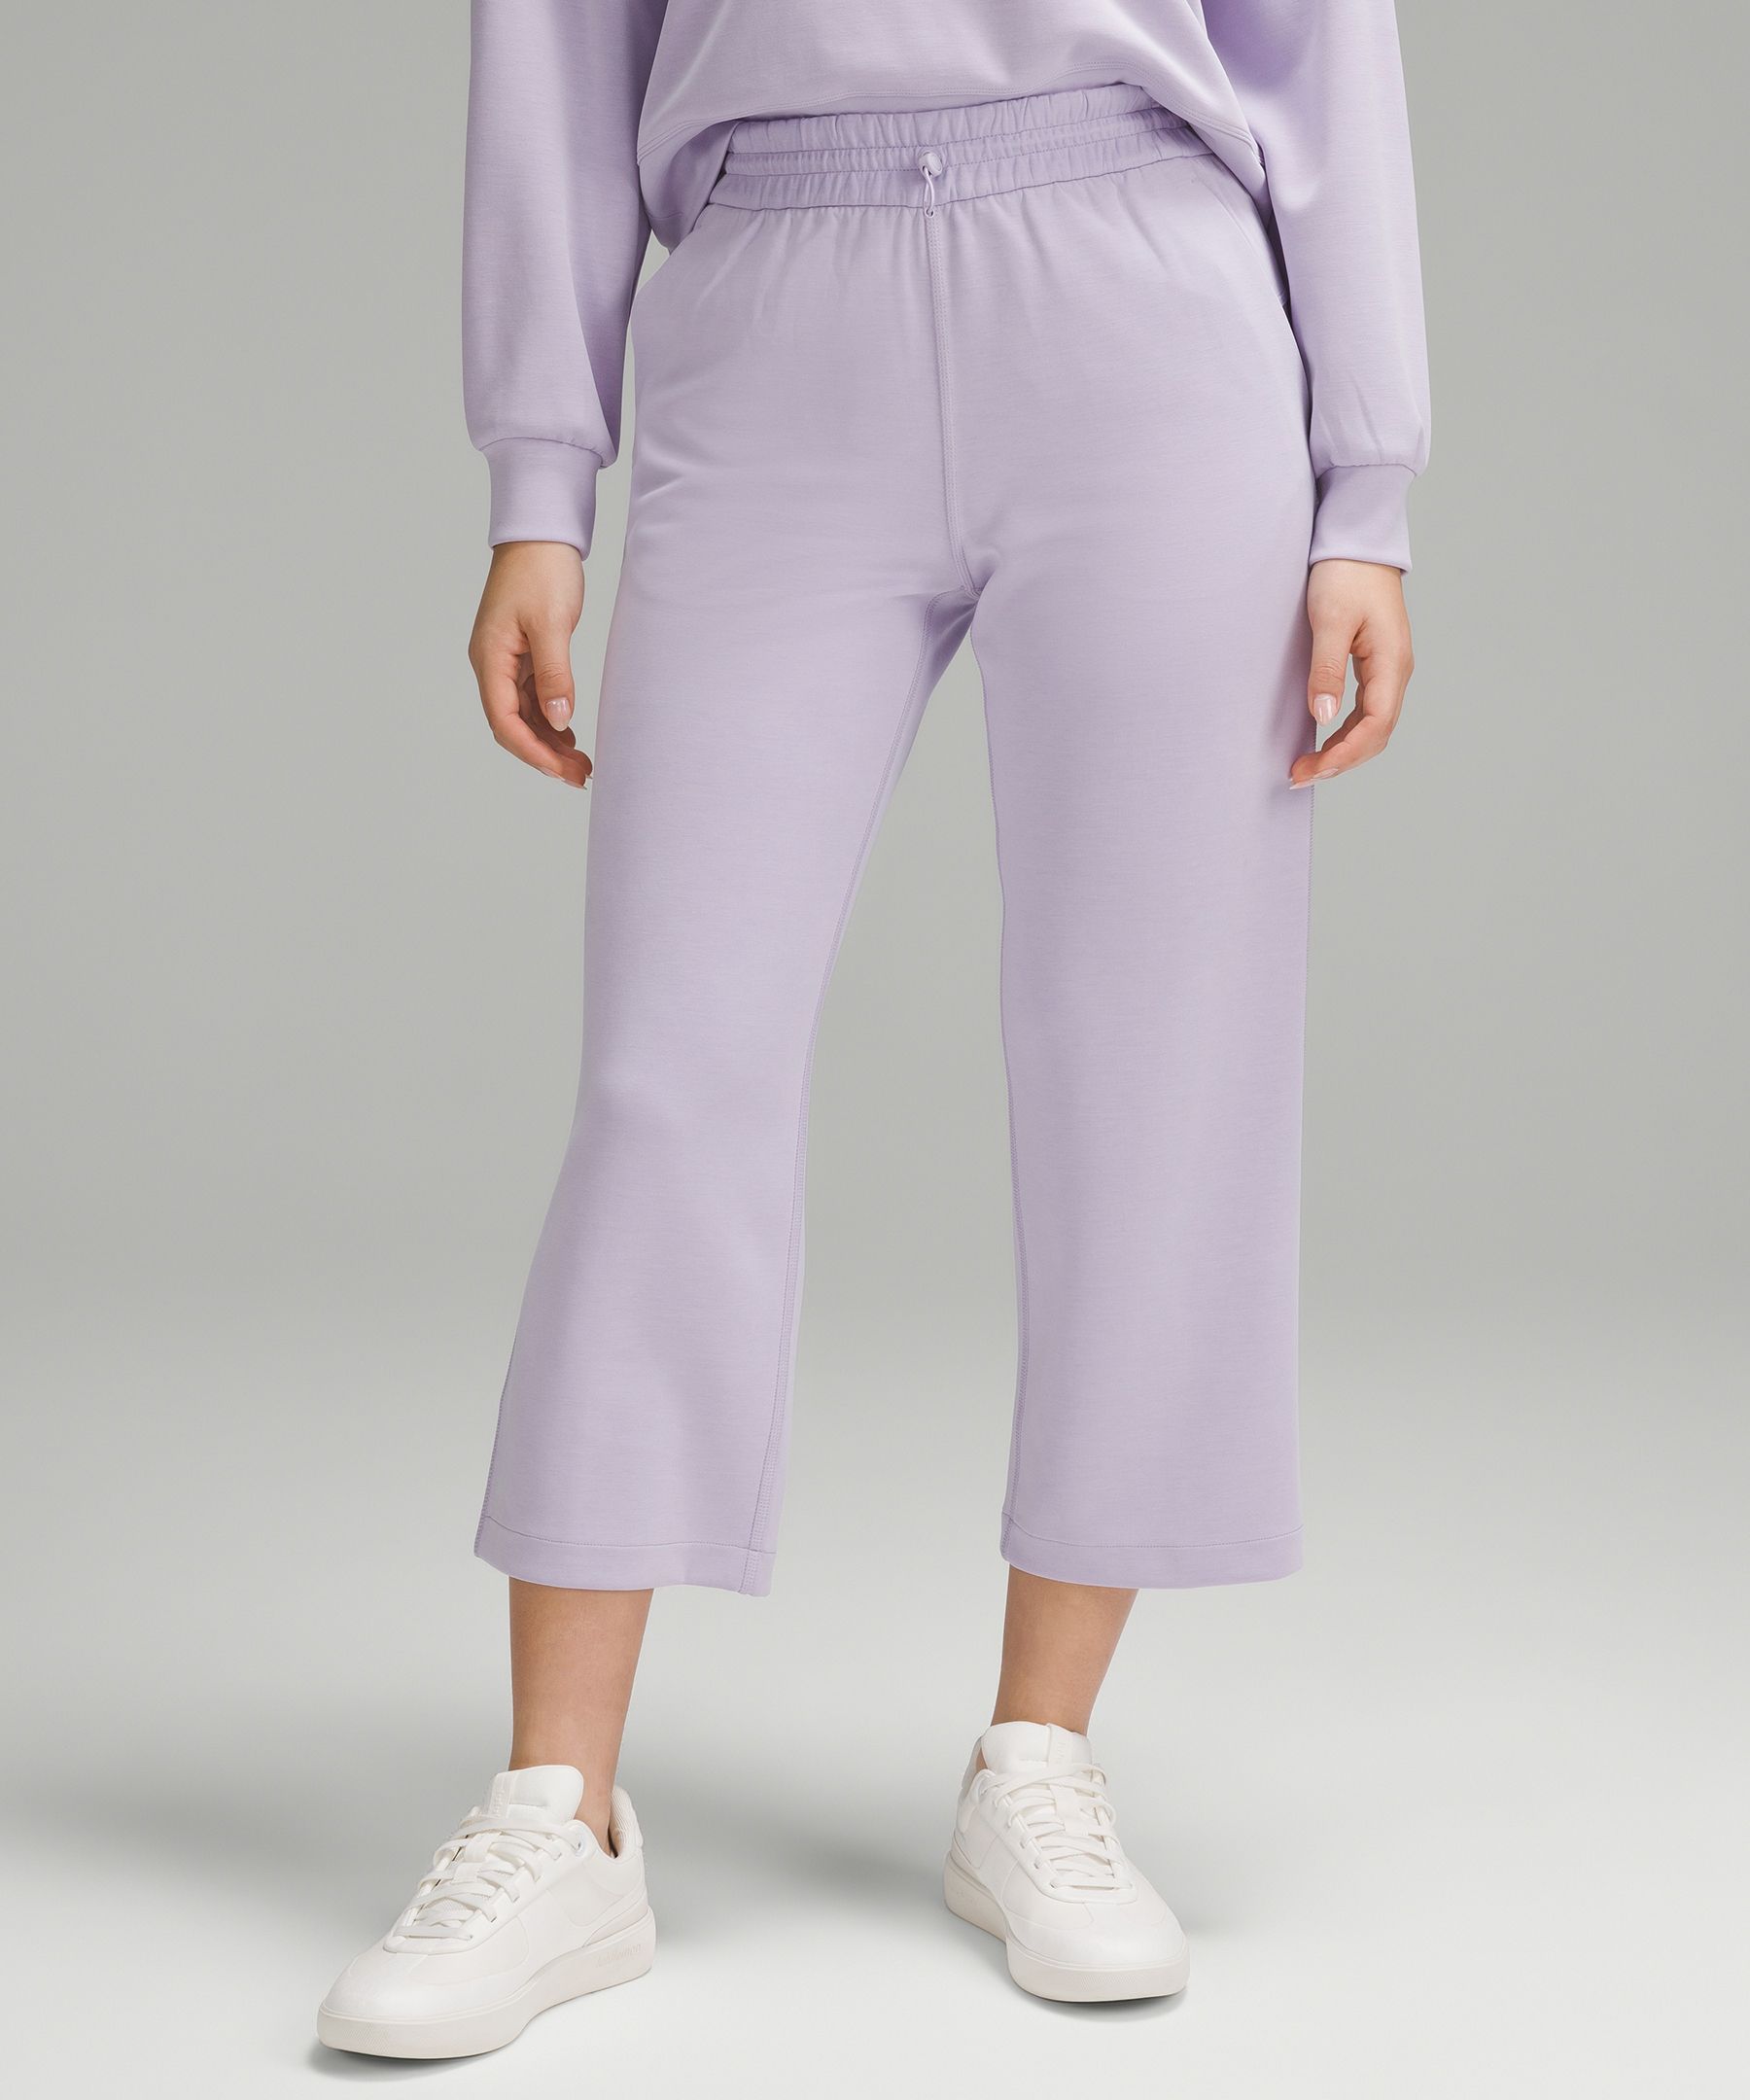 Lululemon NWT Perfectly Oversized Cropped Crew Softstreme - Pink Blossom  Size 14 - $102 (13% Off Retail) New With Tags - From A